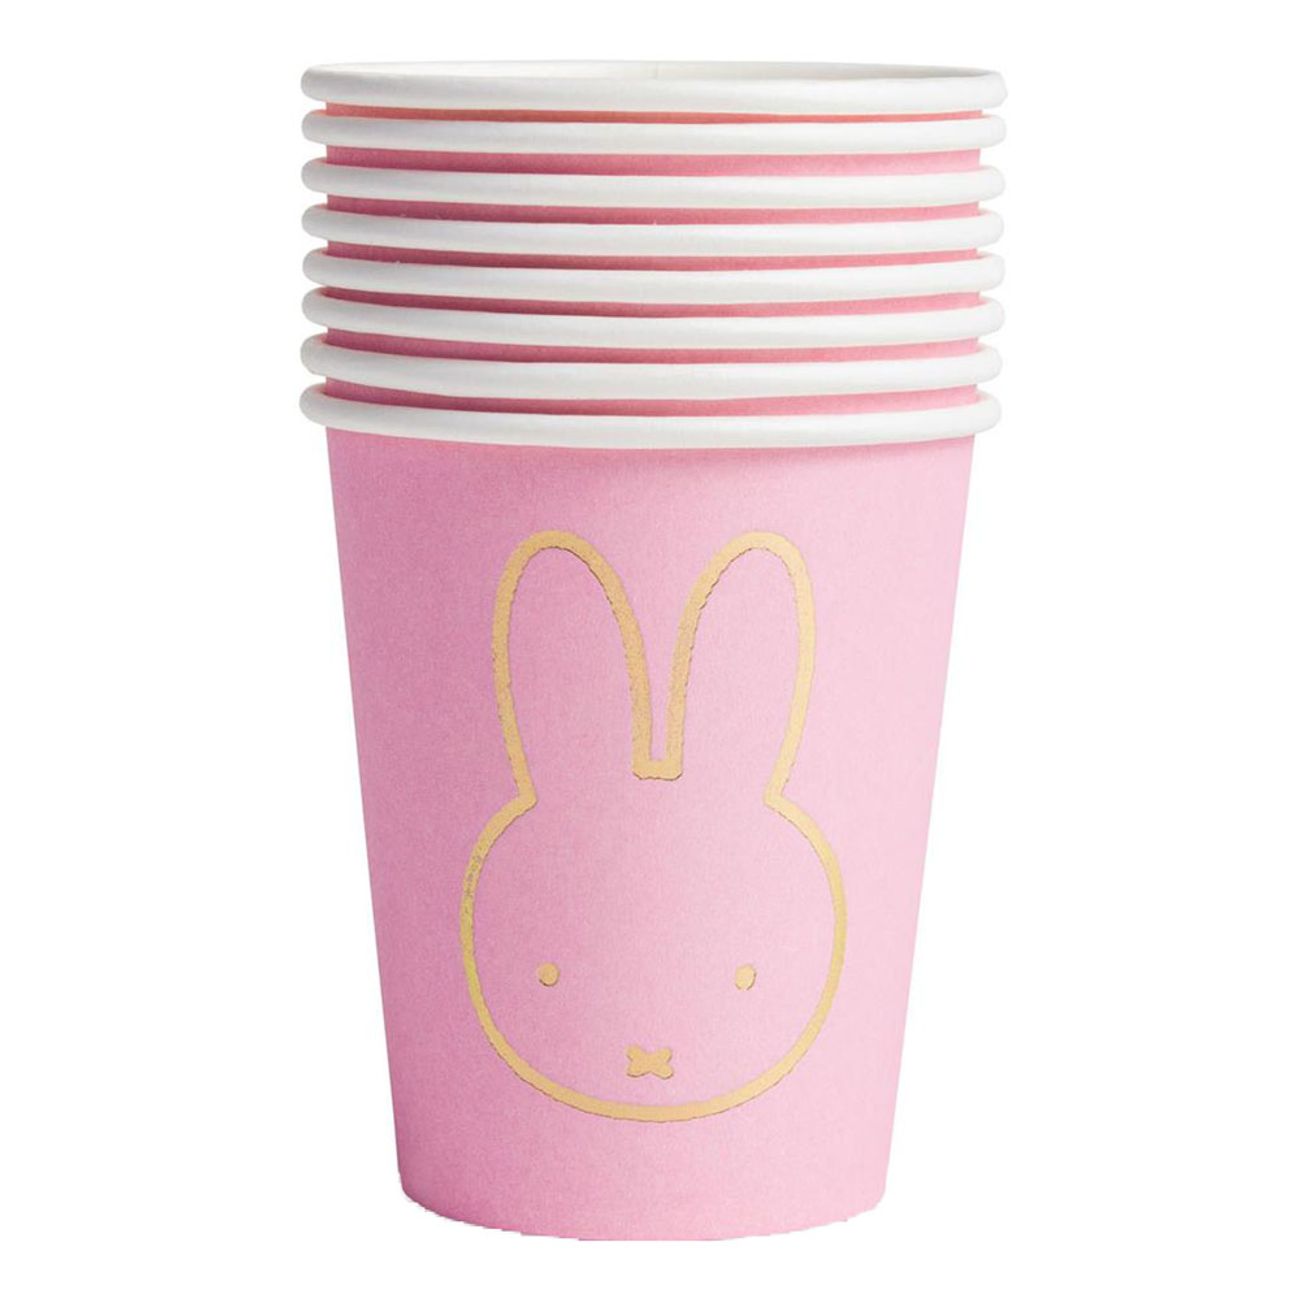 pappersmuggar-miffy-baby-rosa-1